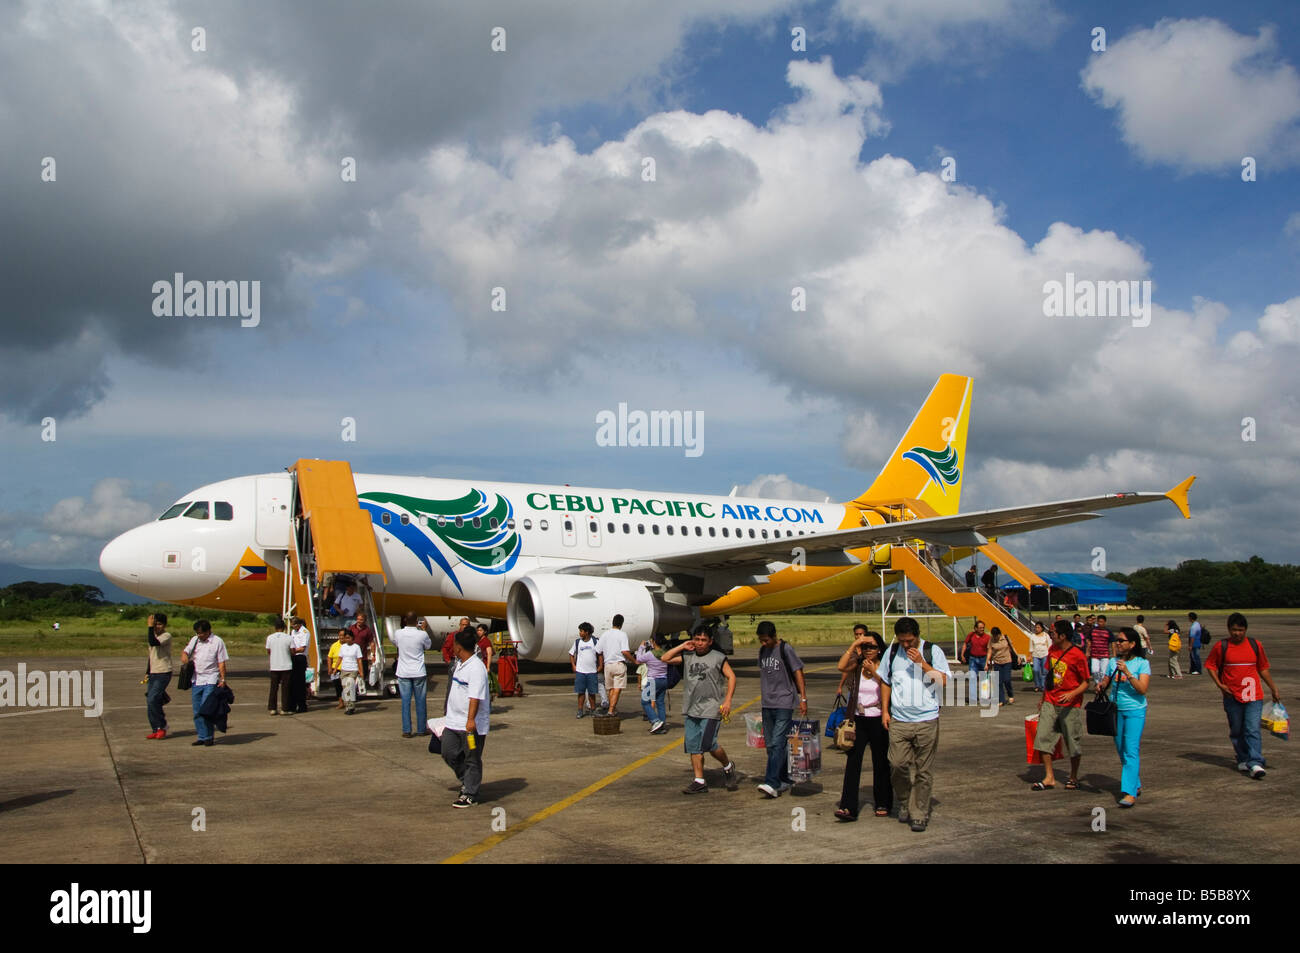 Aeroplane of Cebu Pacific, a low cost airline, Puerto Princesa Airport, Palawan, Philippines, Southeast Asia Stock Photo